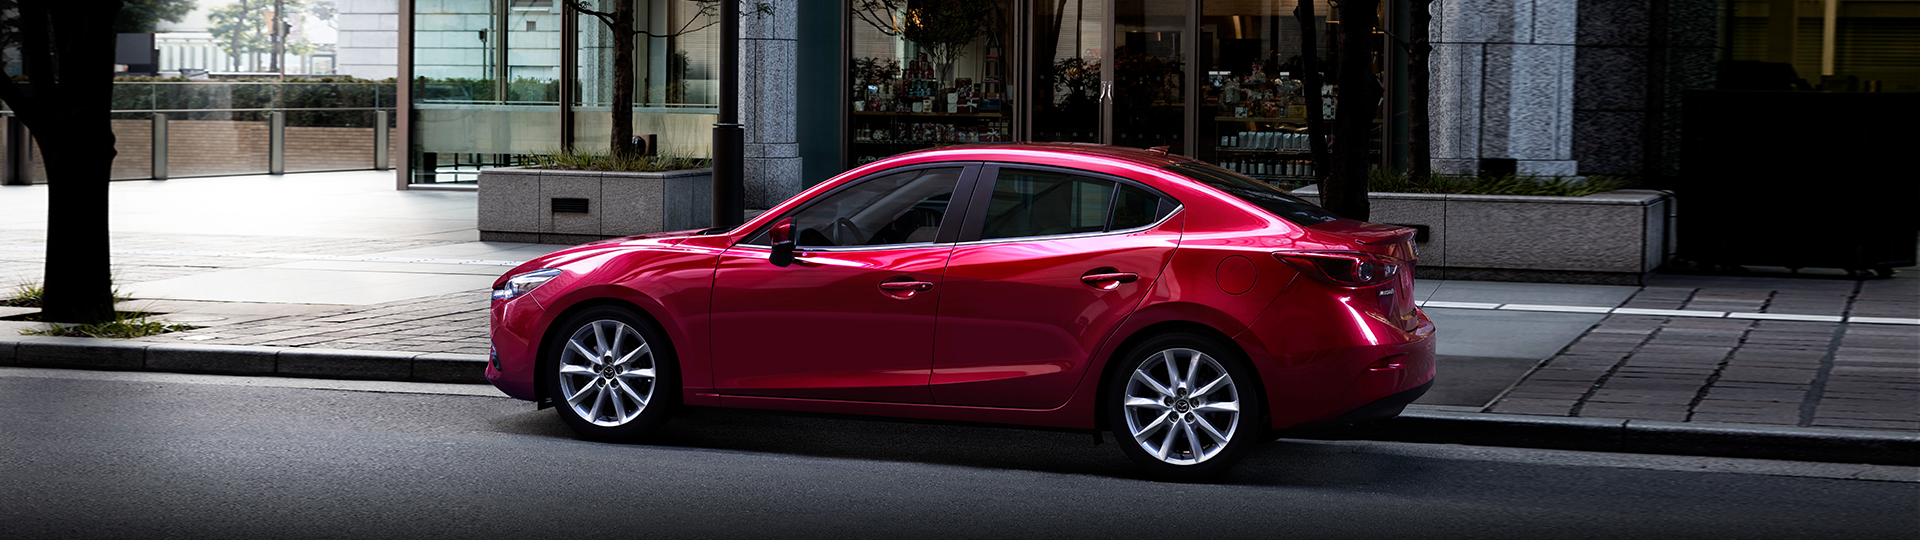 2017-mazda3-exterior-side-view